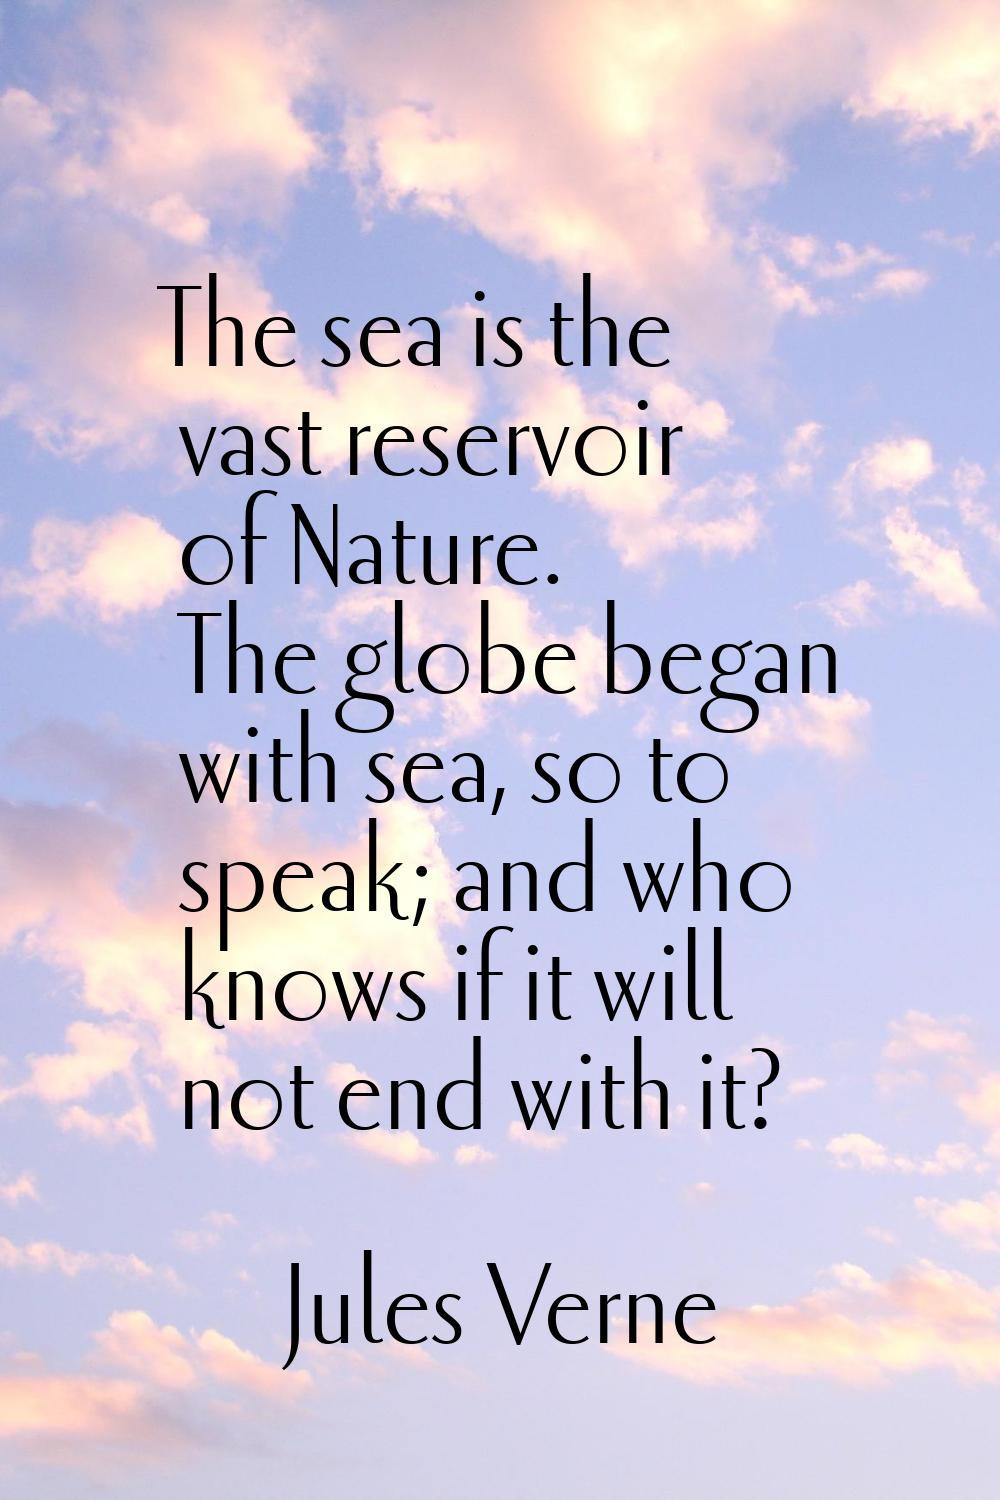 The sea is the vast reservoir of Nature. The globe began with sea, so to speak; and who knows if it